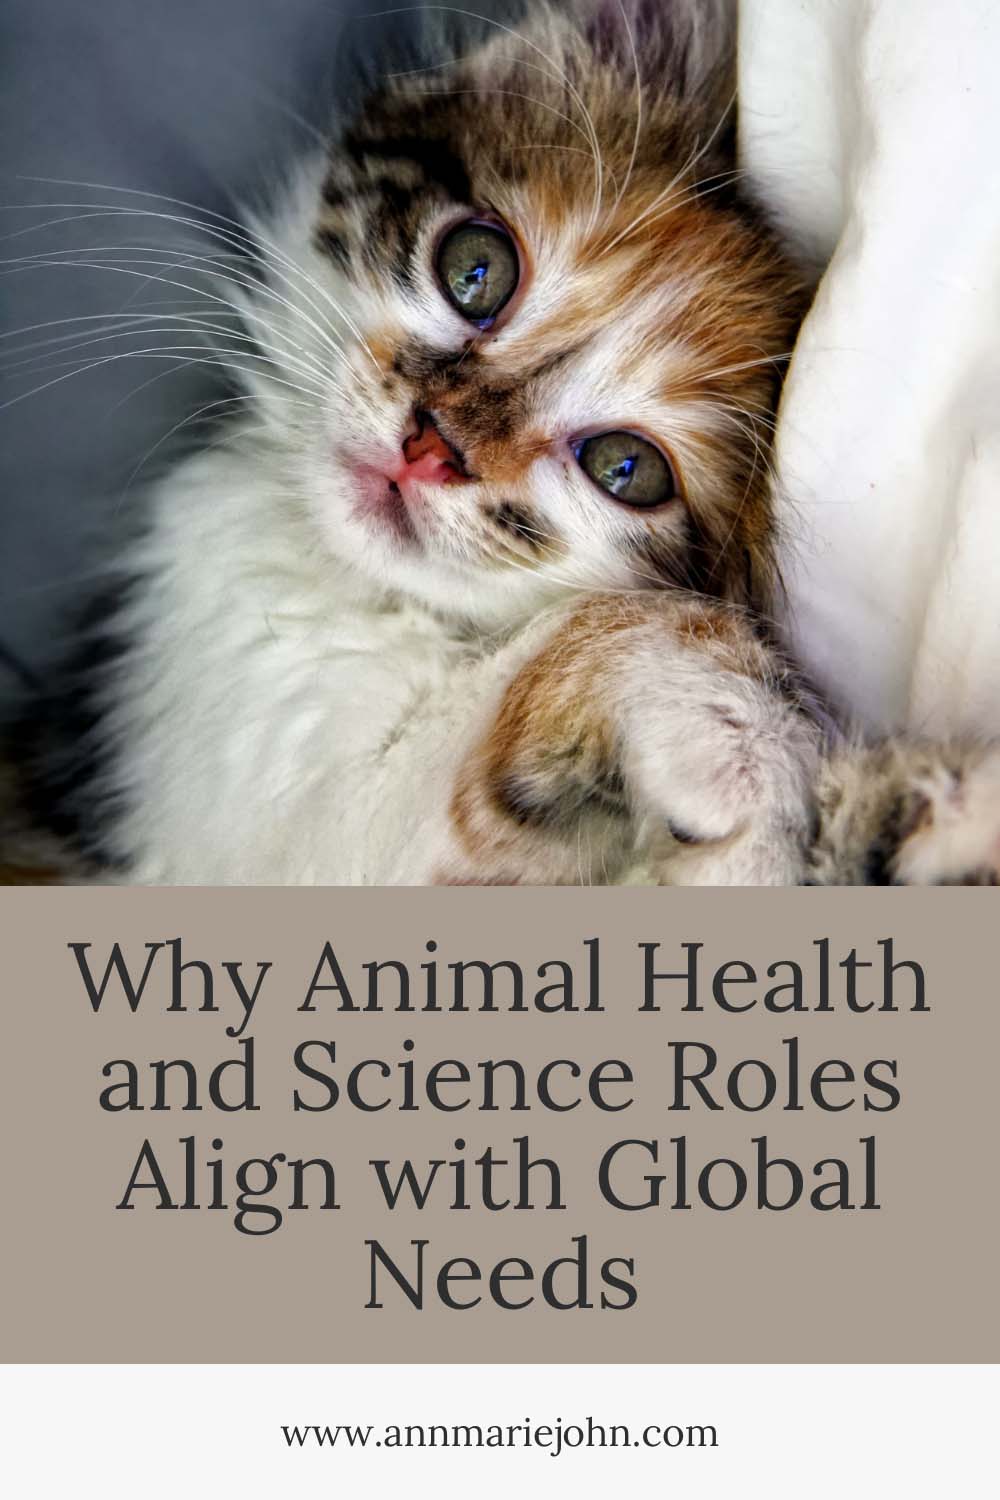 Why Animal Health and Science Roles Align with Global Needs